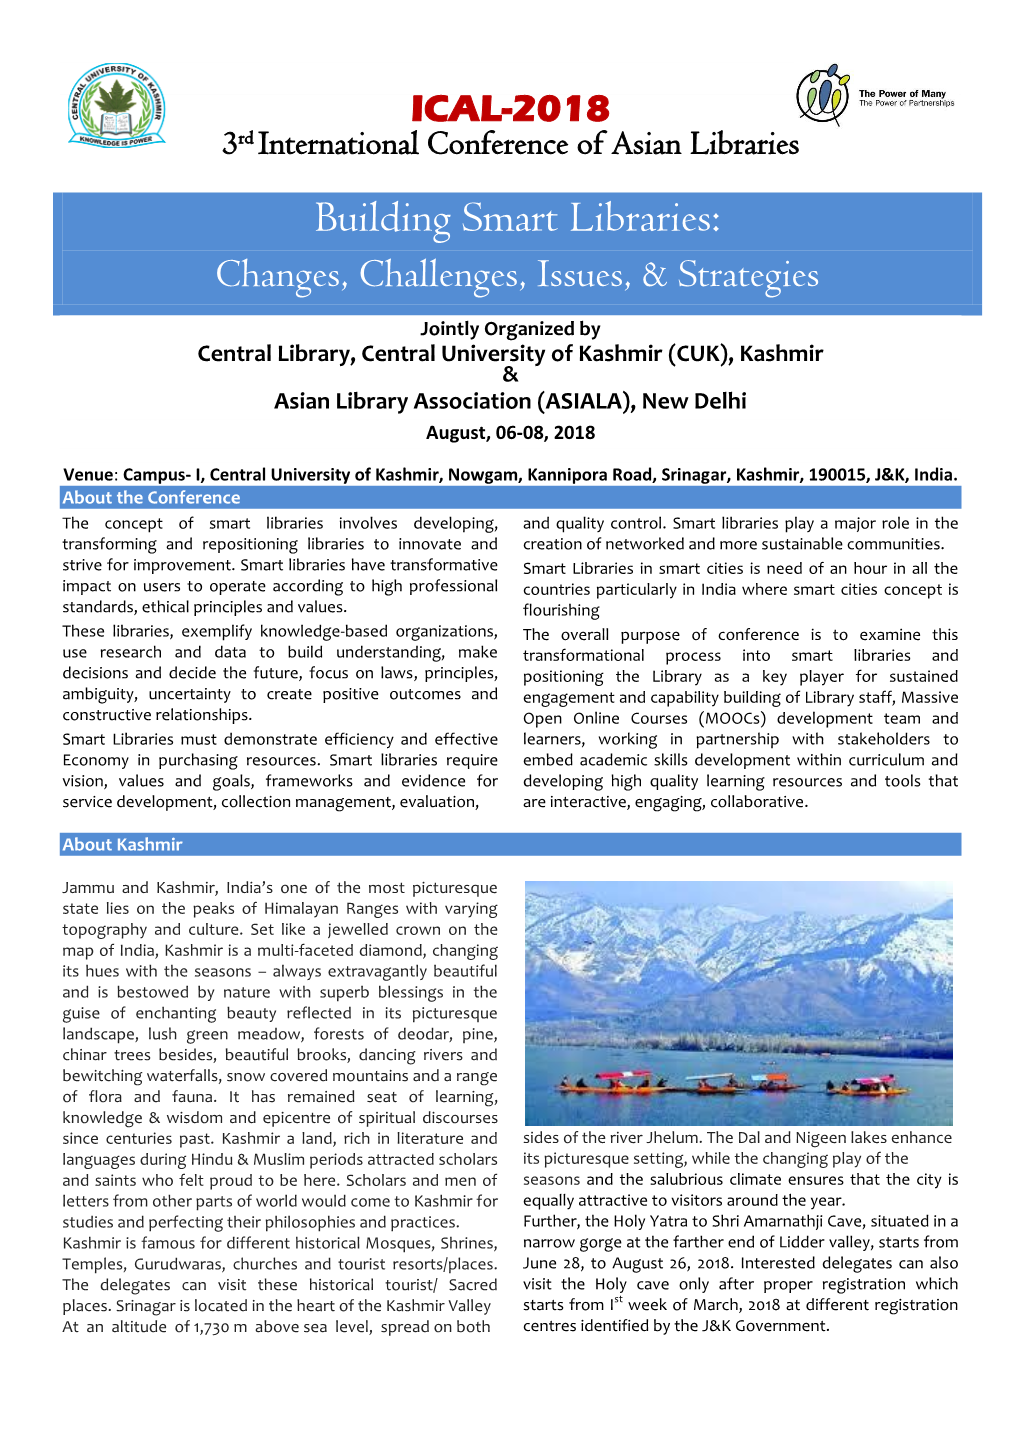 Building Smart Libraries: Changes, Challenges, Issues, & Strategies